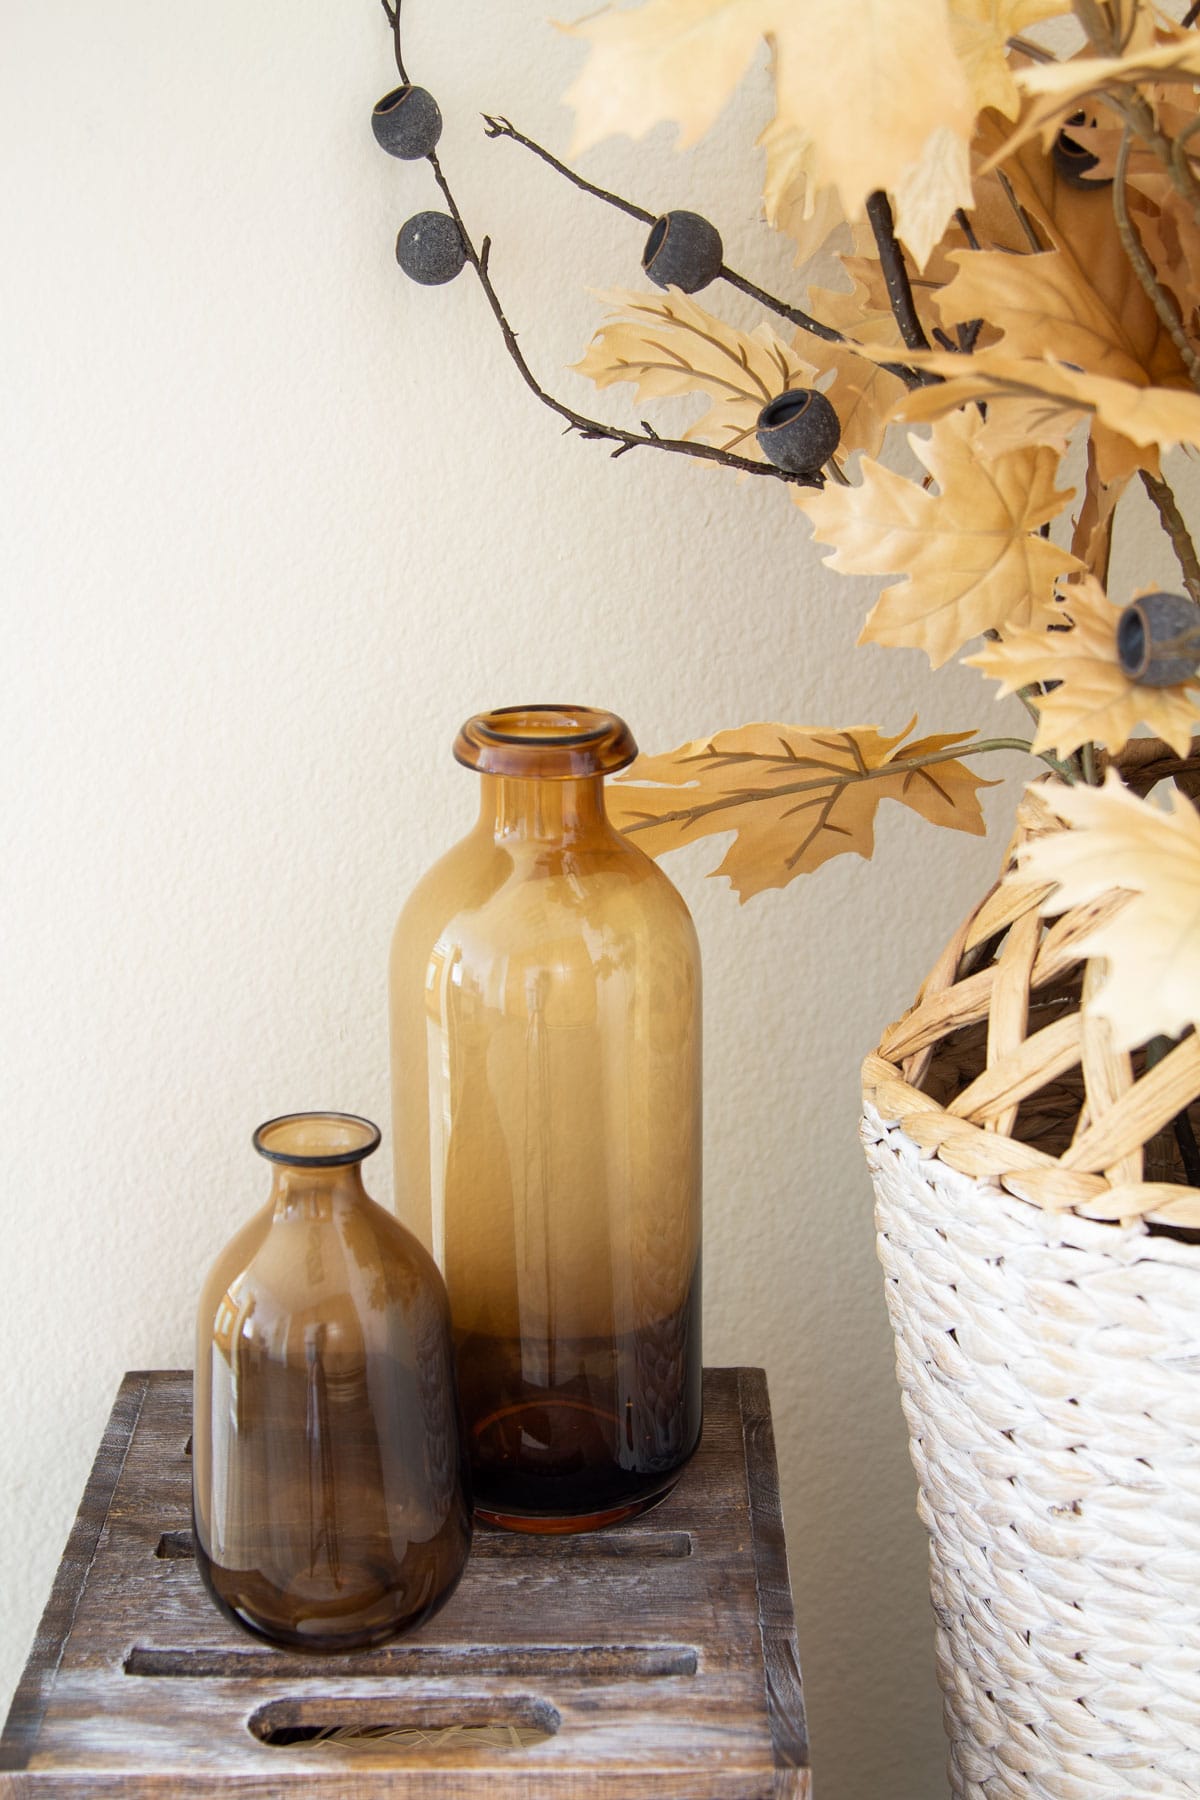 tiny entryway fall decor ideas pinterest challenge amber bottles on wood surface with woven vase